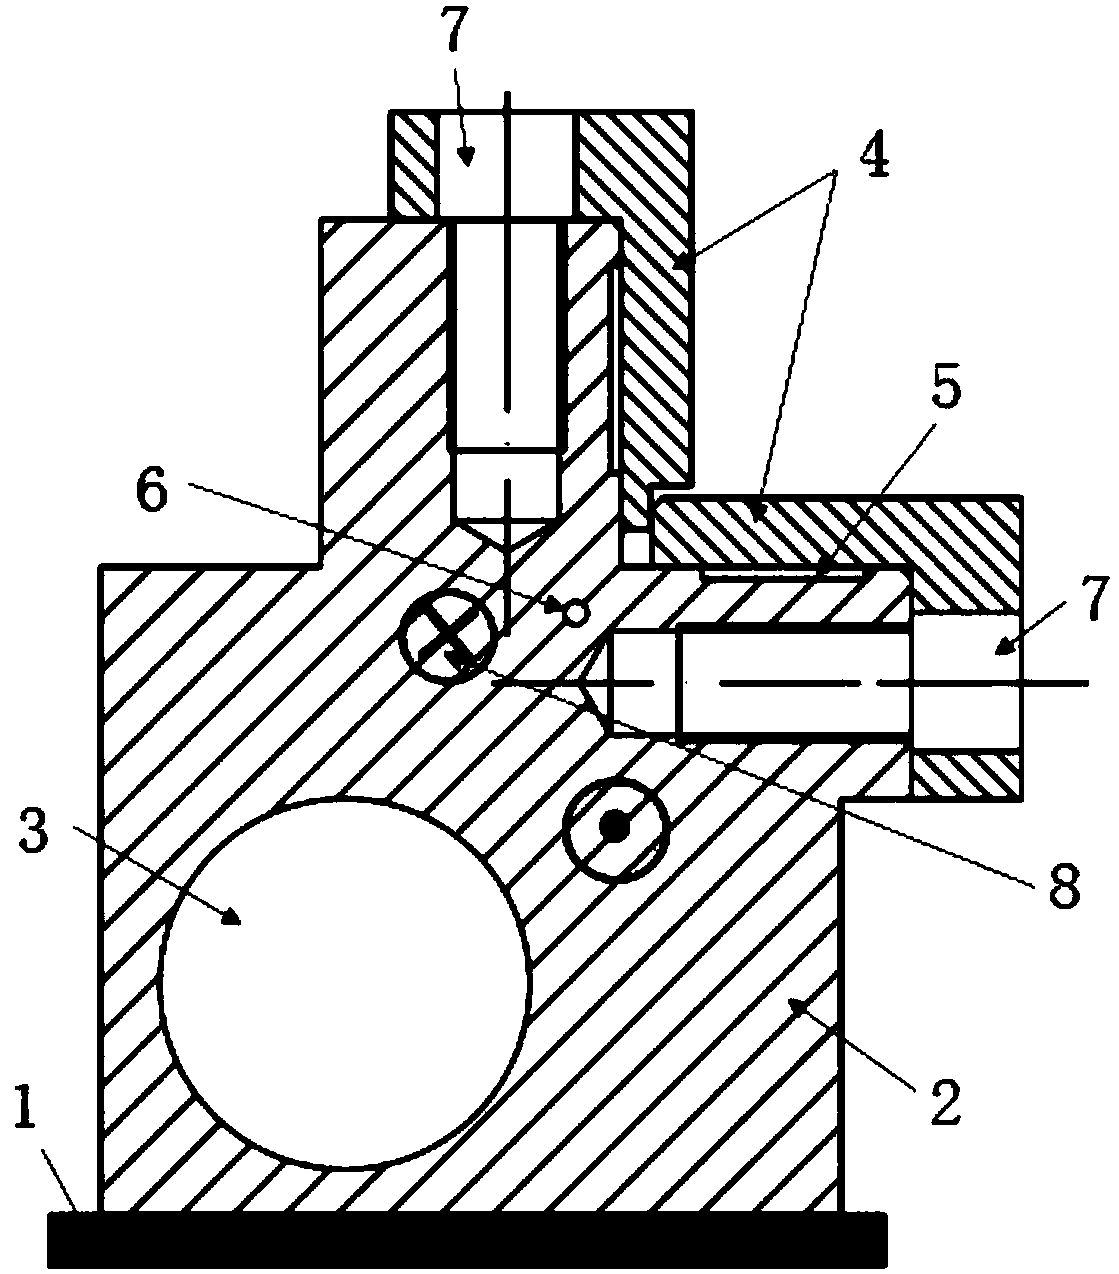 A welding device and method for superconducting joints inside nbti/cu superconducting coils